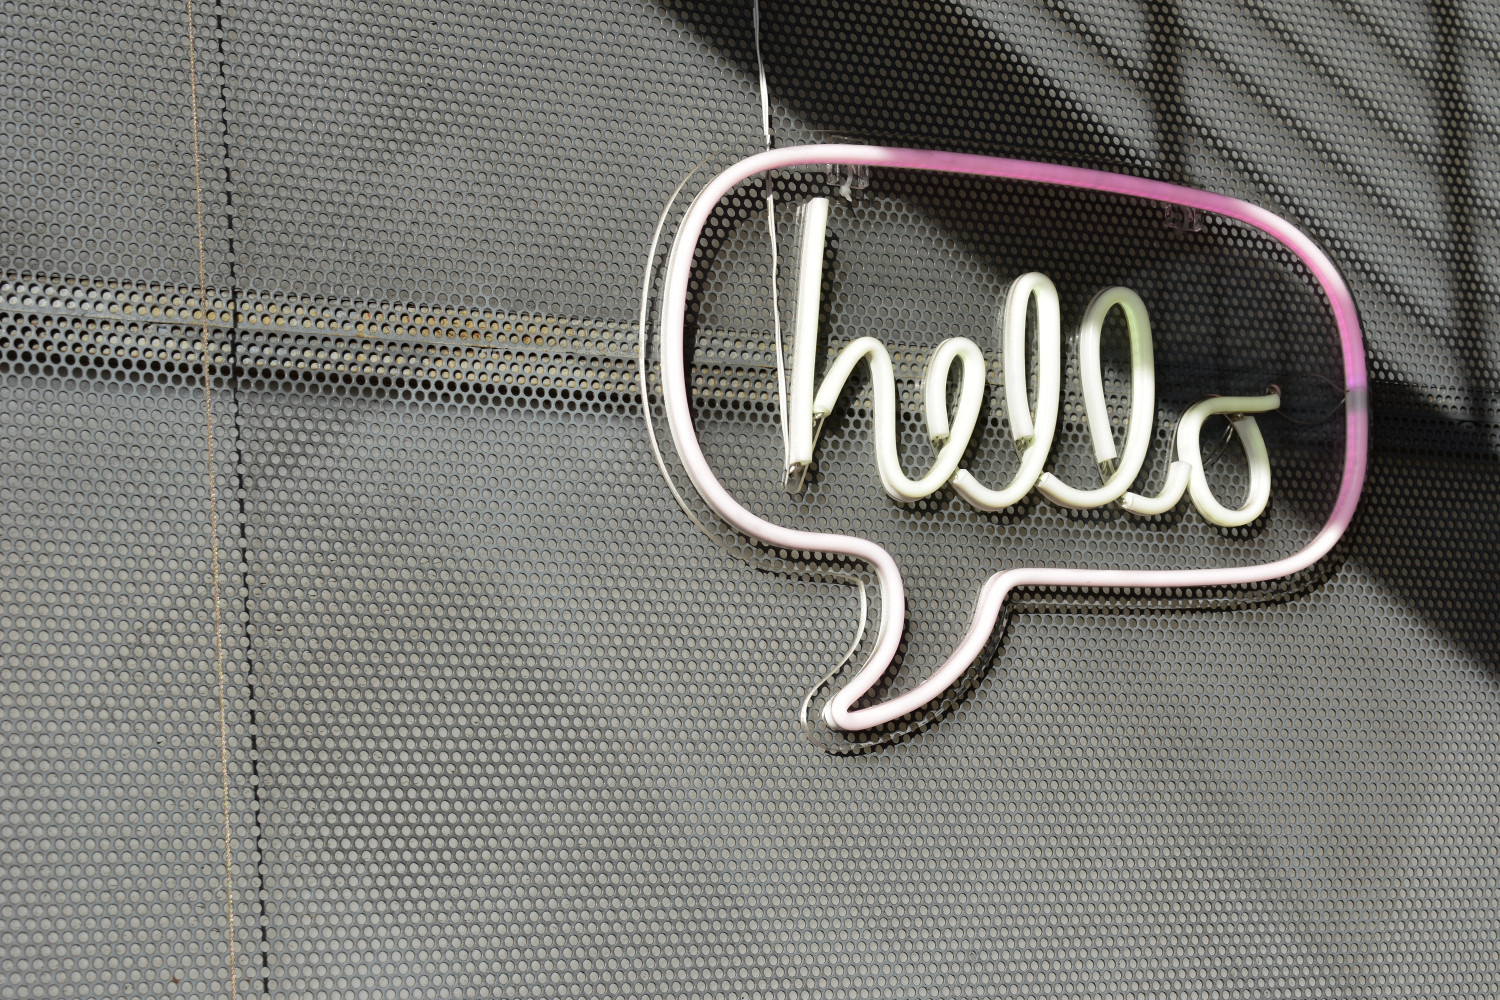 Neon sign with a speech bubble reading 'Hello'